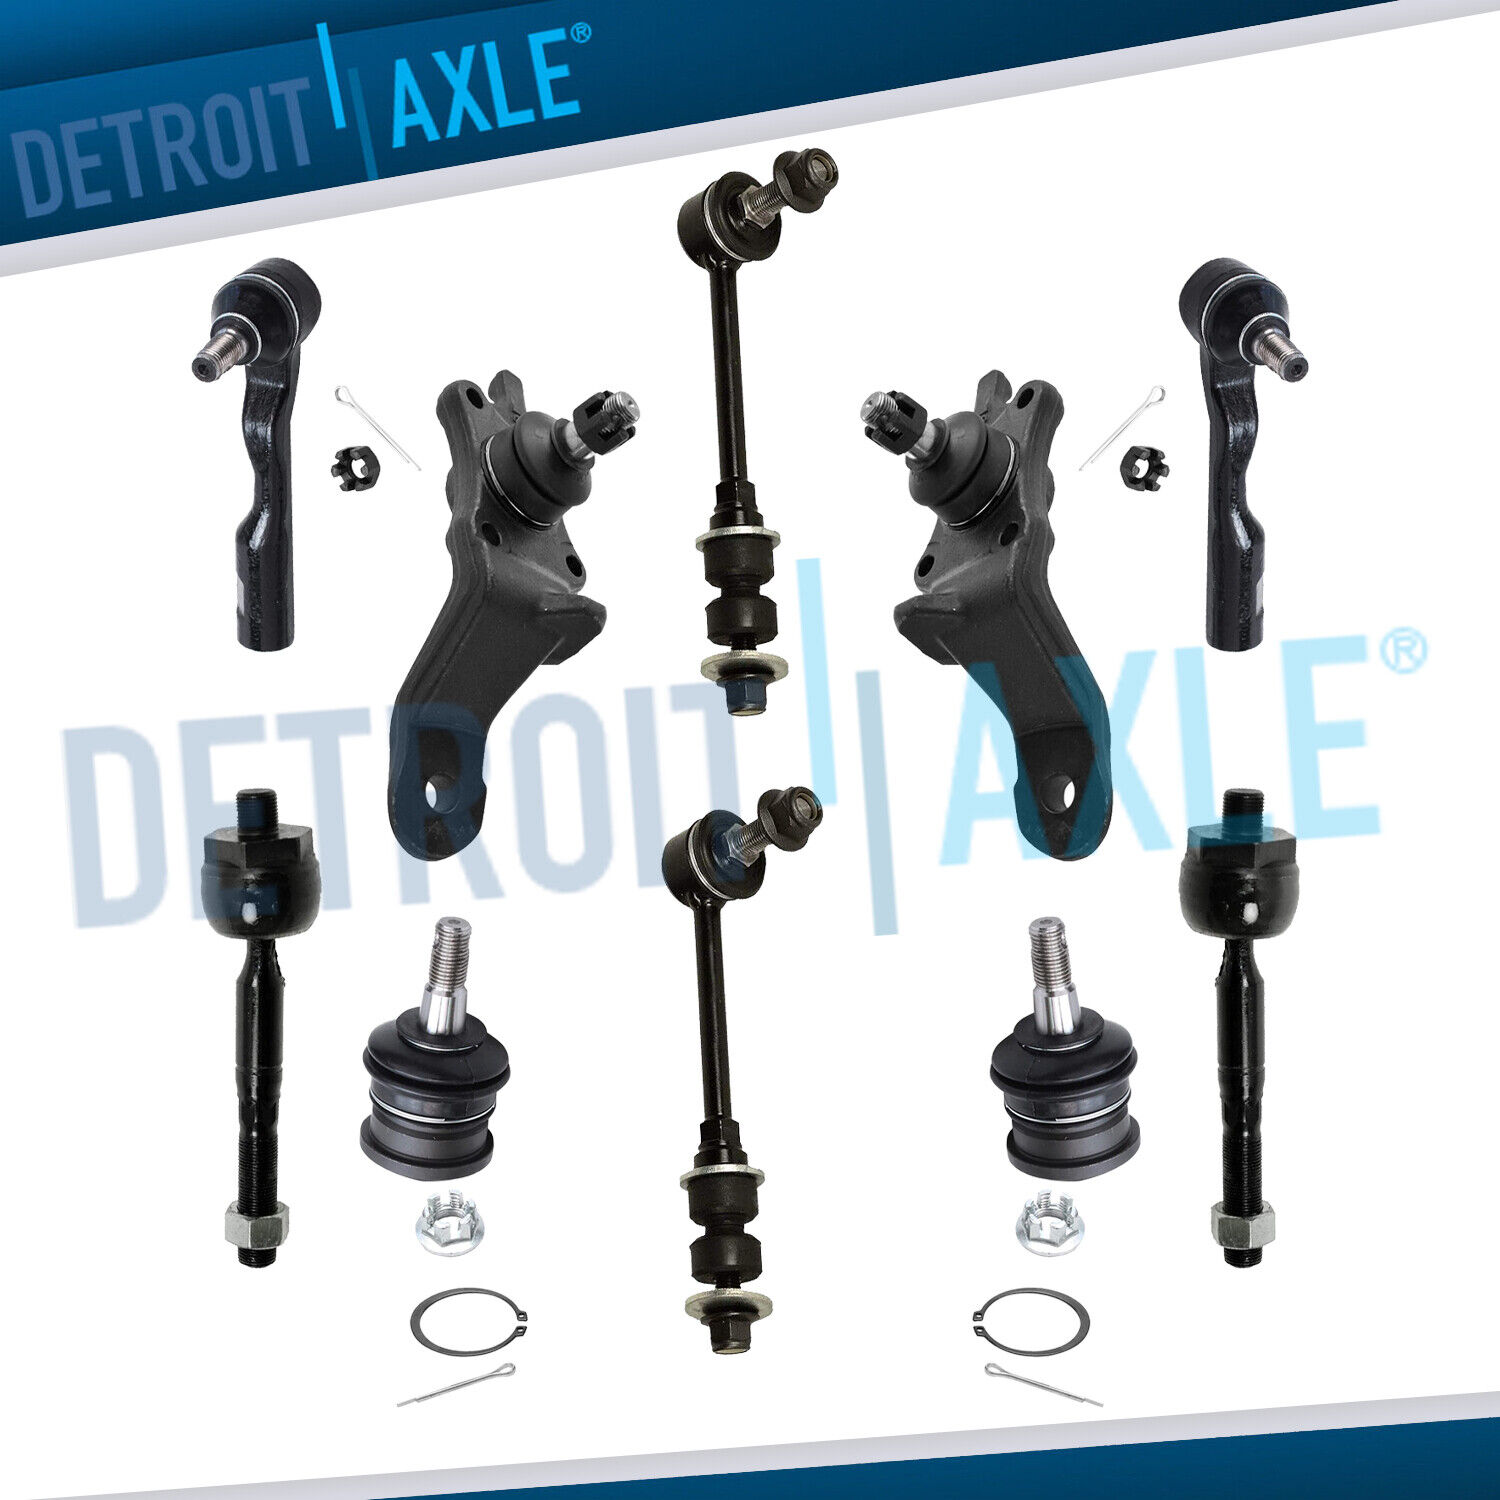 New 10pc Complete Front Suspension Kit for Toyota Tundra & Sequoia